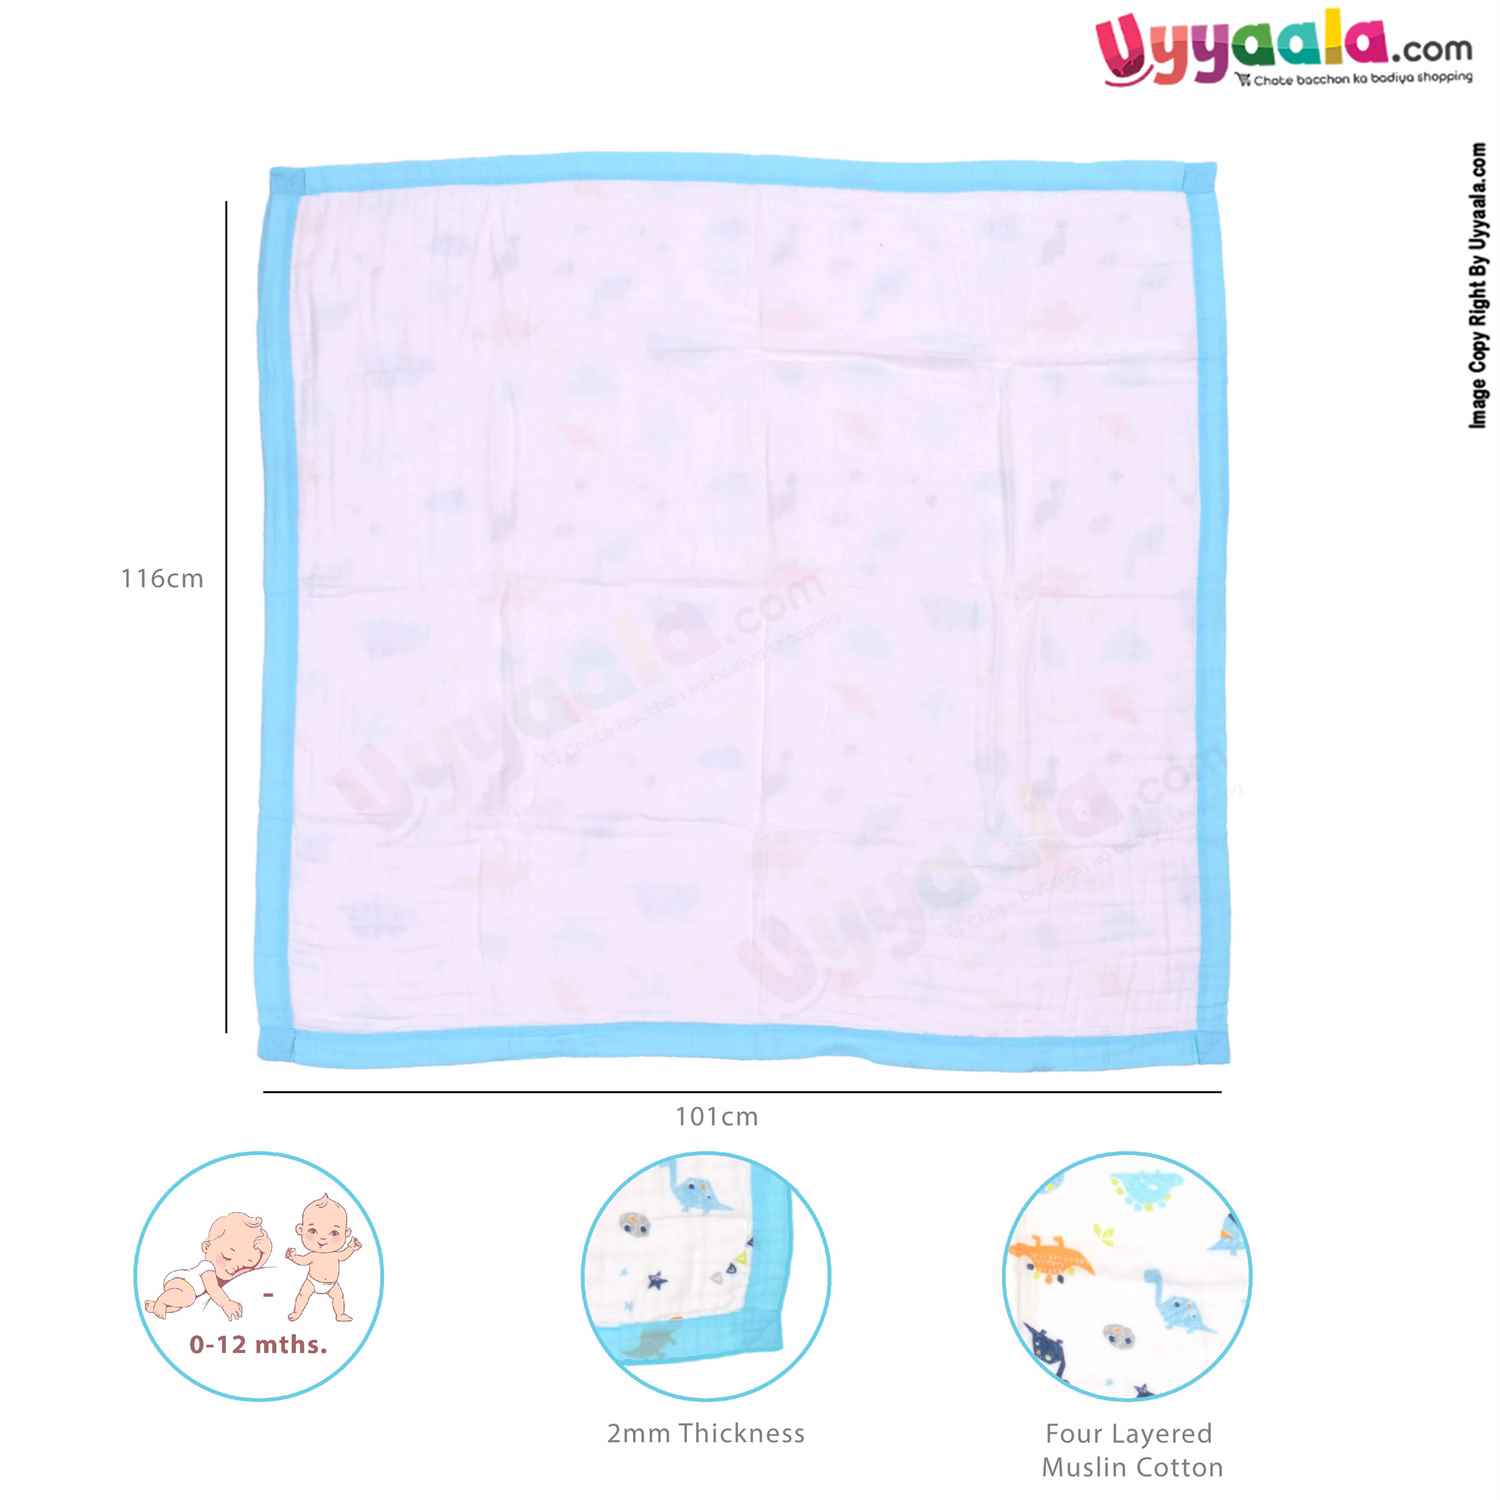 Four Layered Muslin Cotton Wrapper with Border, Dinos Print for Babies 0+m Age, Size (113*101cm)-White & Blue